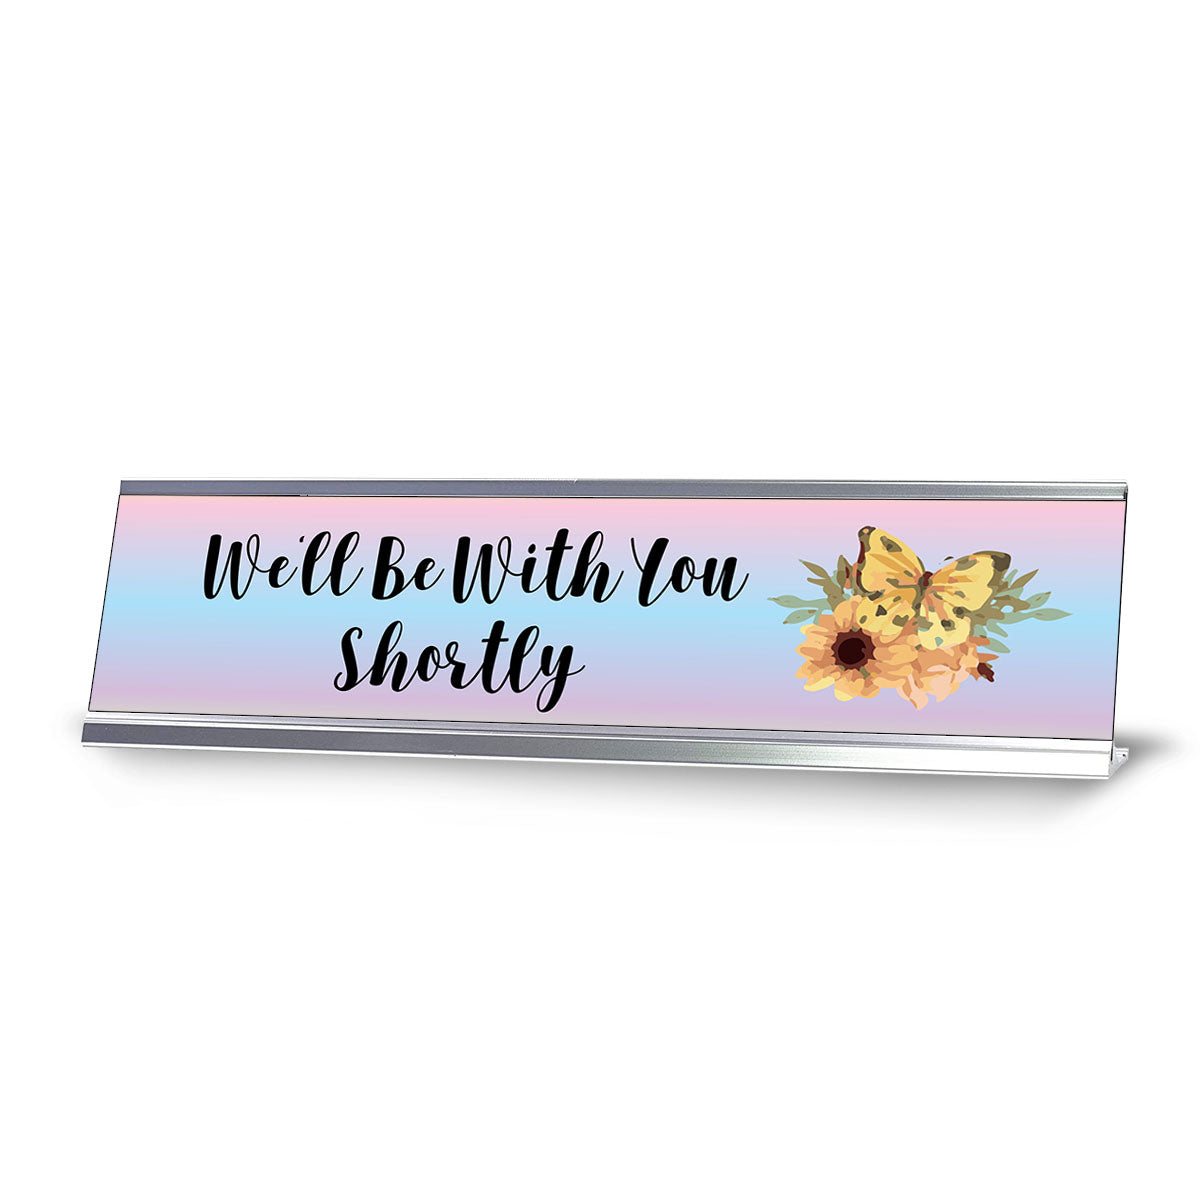 We'll Be With Your Shortly, Desk Sign or Front Desk Counter Sign (2 x 8")